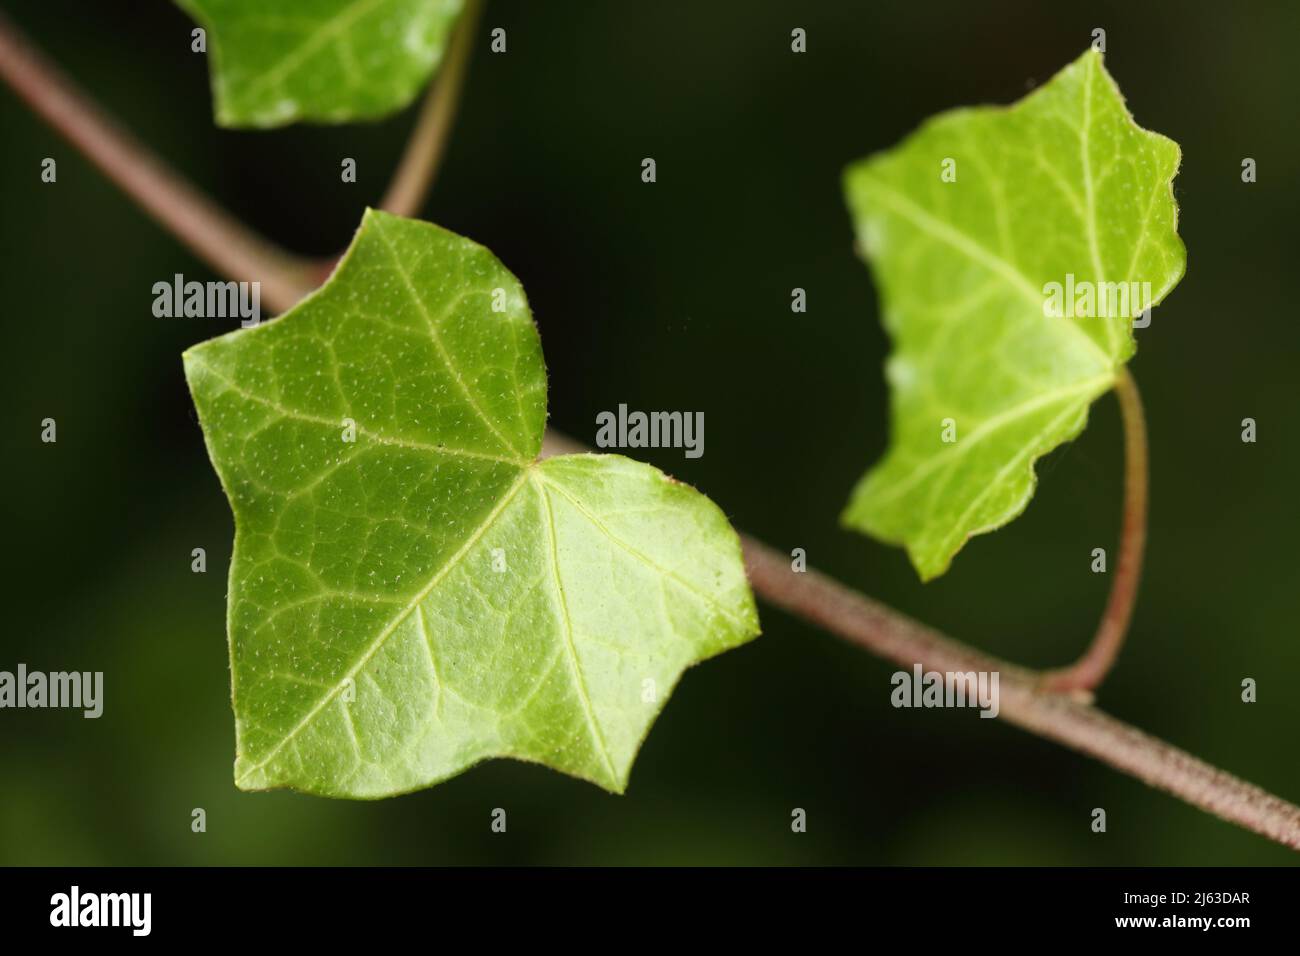 Hedera helix, the common ivy, or English ivy, European ivy, or just ivy, is a species of flowering plant of the ivy genus in the family Araliaceae, na Stock Photo